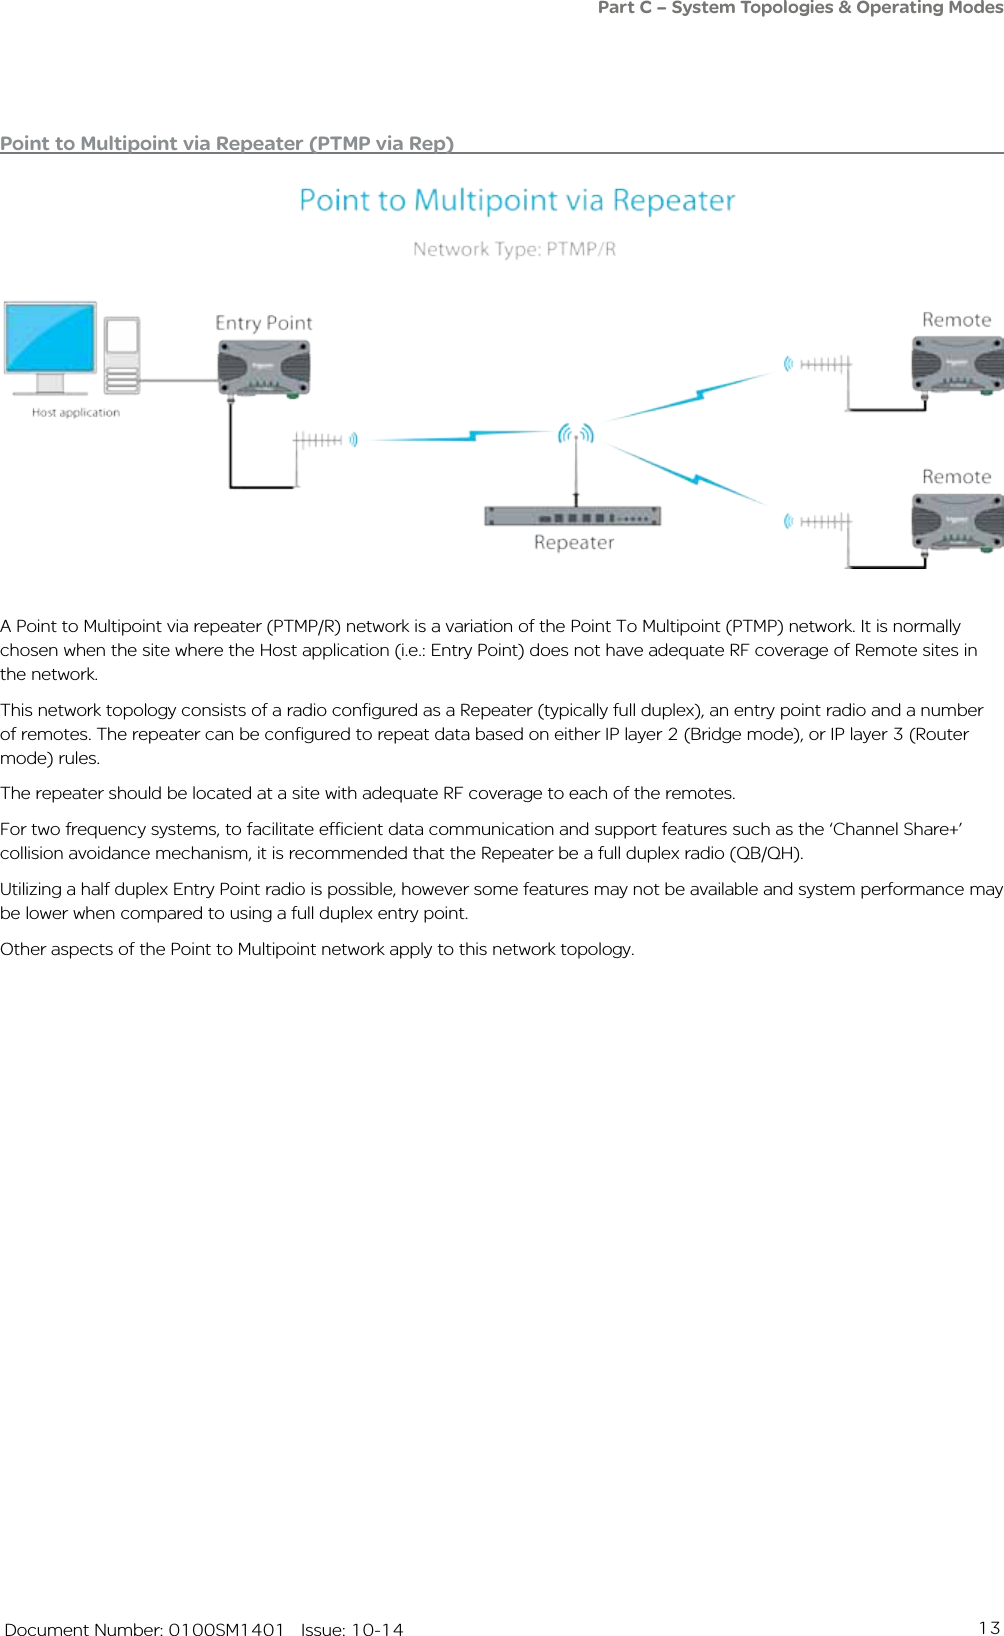 13   Document Number: 0100SM1401   Issue: 10-14Point to Multipoint via Repeater (PTMP via Rep)A Point to Multipoint via repeater (PTMP/R) network is a variation of the Point To Multipoint (PTMP) network. It is normally chosen when the site where the Host application (i.e.: Entry Point) does not have adequate RF coverage of Remote sites in the network. This network topology consists of a radio configured as a Repeater (typically full duplex), an entry point radio and a number of remotes. The repeater can be configured to repeat data based on either IP layer 2 (Bridge mode), or IP layer 3 (Router mode) rules. The repeater should be located at a site with adequate RF coverage to each of the remotes. For two frequency systems, to facilitate efficient data communication and support features such as the ‘Channel Share+’ collision avoidance mechanism, it is recommended that the Repeater be a full duplex radio (QB/QH). Utilizing a half duplex Entry Point radio is possible, however some features may not be available and system performance may be lower when compared to using a full duplex entry point.Other aspects of the Point to Multipoint network apply to this network topology.Part C – System Topologies &amp; Operating Modes